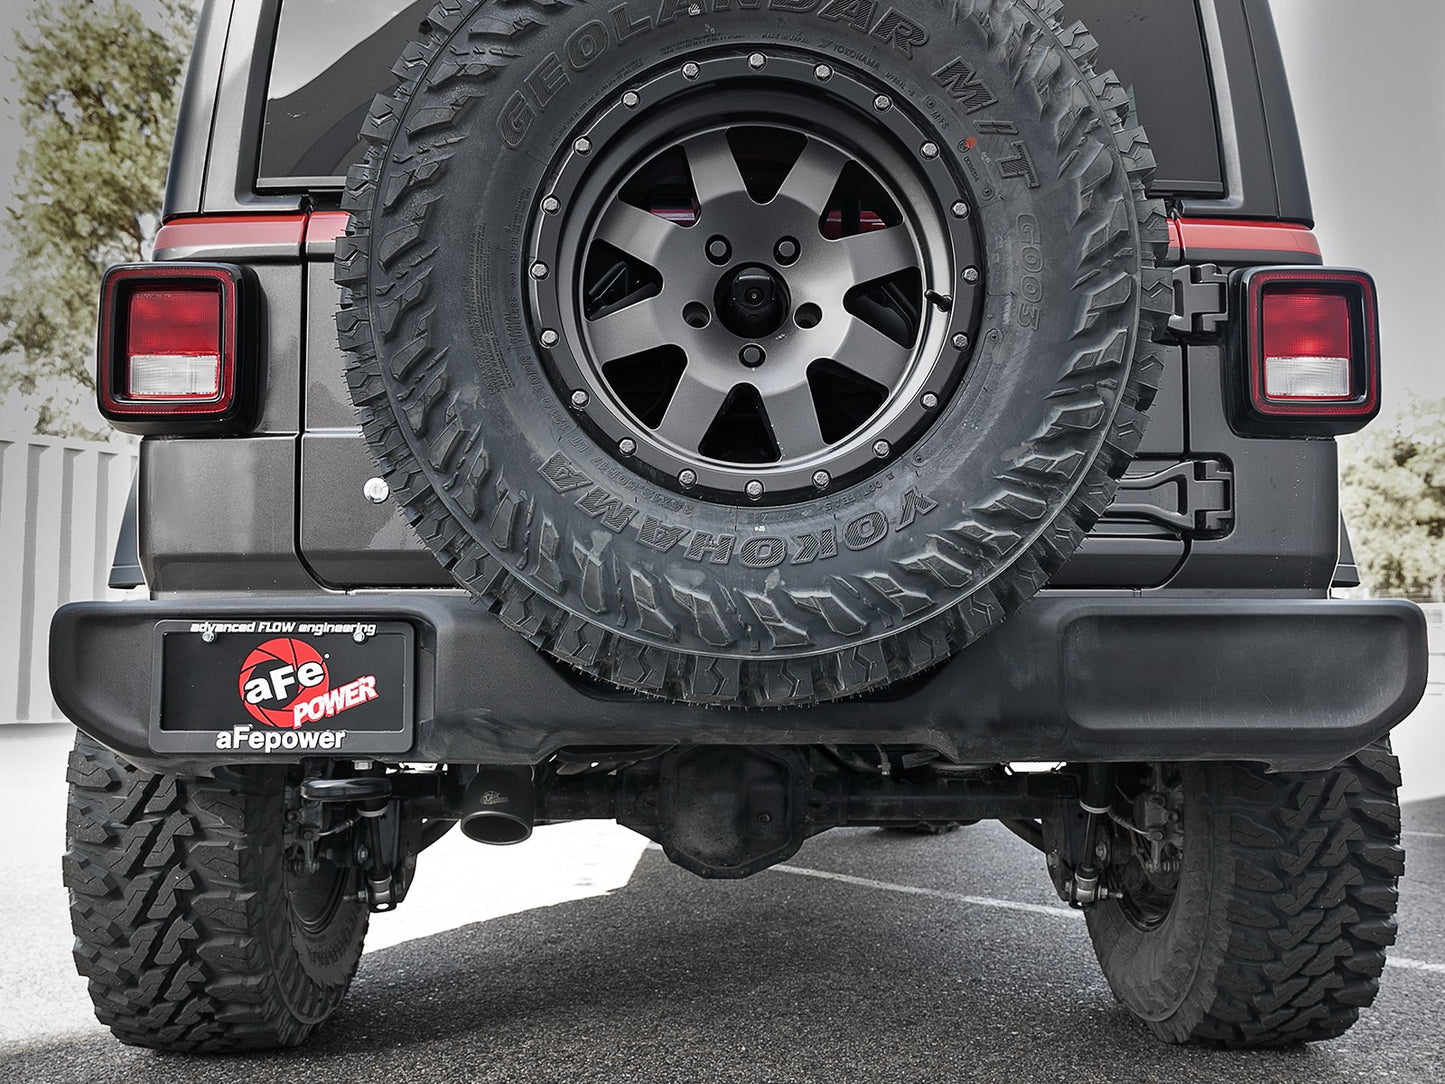 AFE POWER Mach Force-Xp 2-1/2" 409 Stainless Steel Catback Hi-Tuck Exhaust (Black Tip) System Jeep Wrangler (JL) 2018-2020